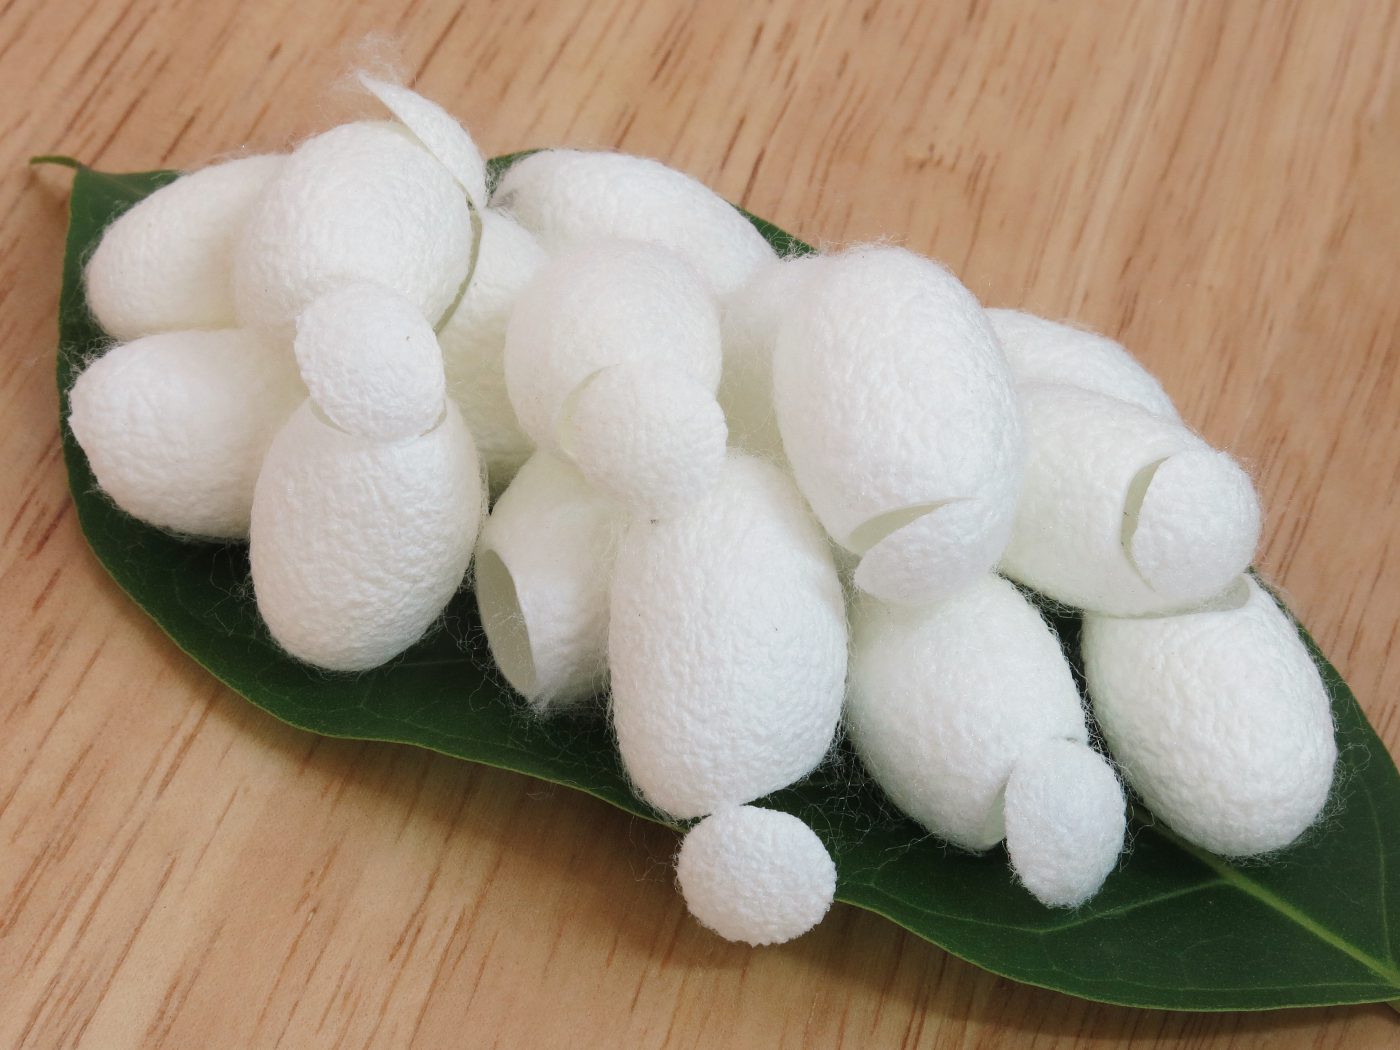 Textile: Silk Worm Cocoons
